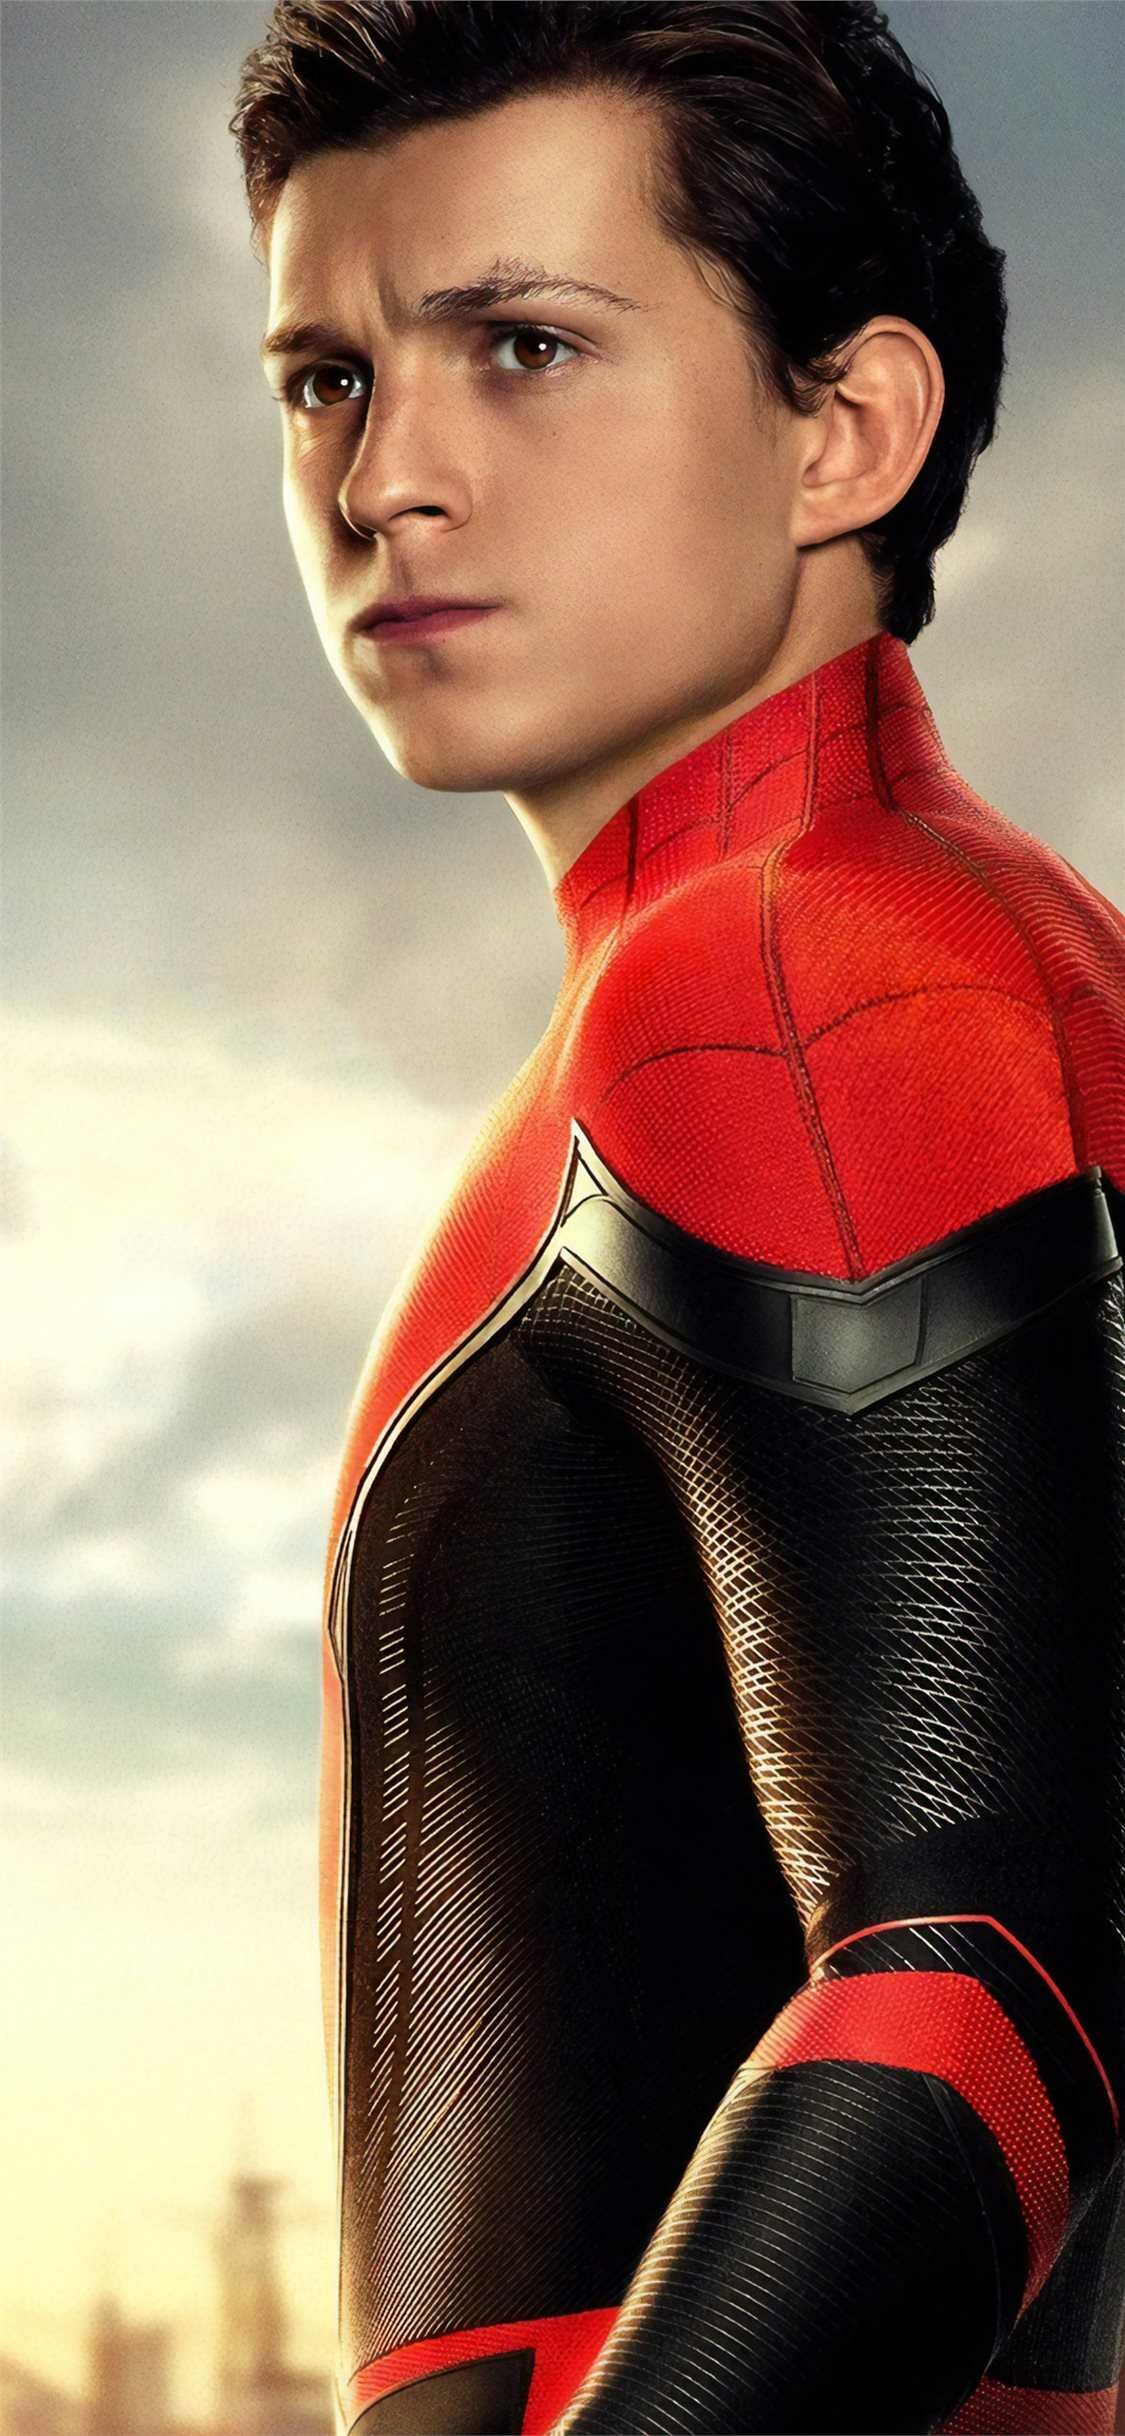 Tom Holland: First appeared as Spider-Man in Captain America: Civil War (2016). 1130x2440 HD Background.